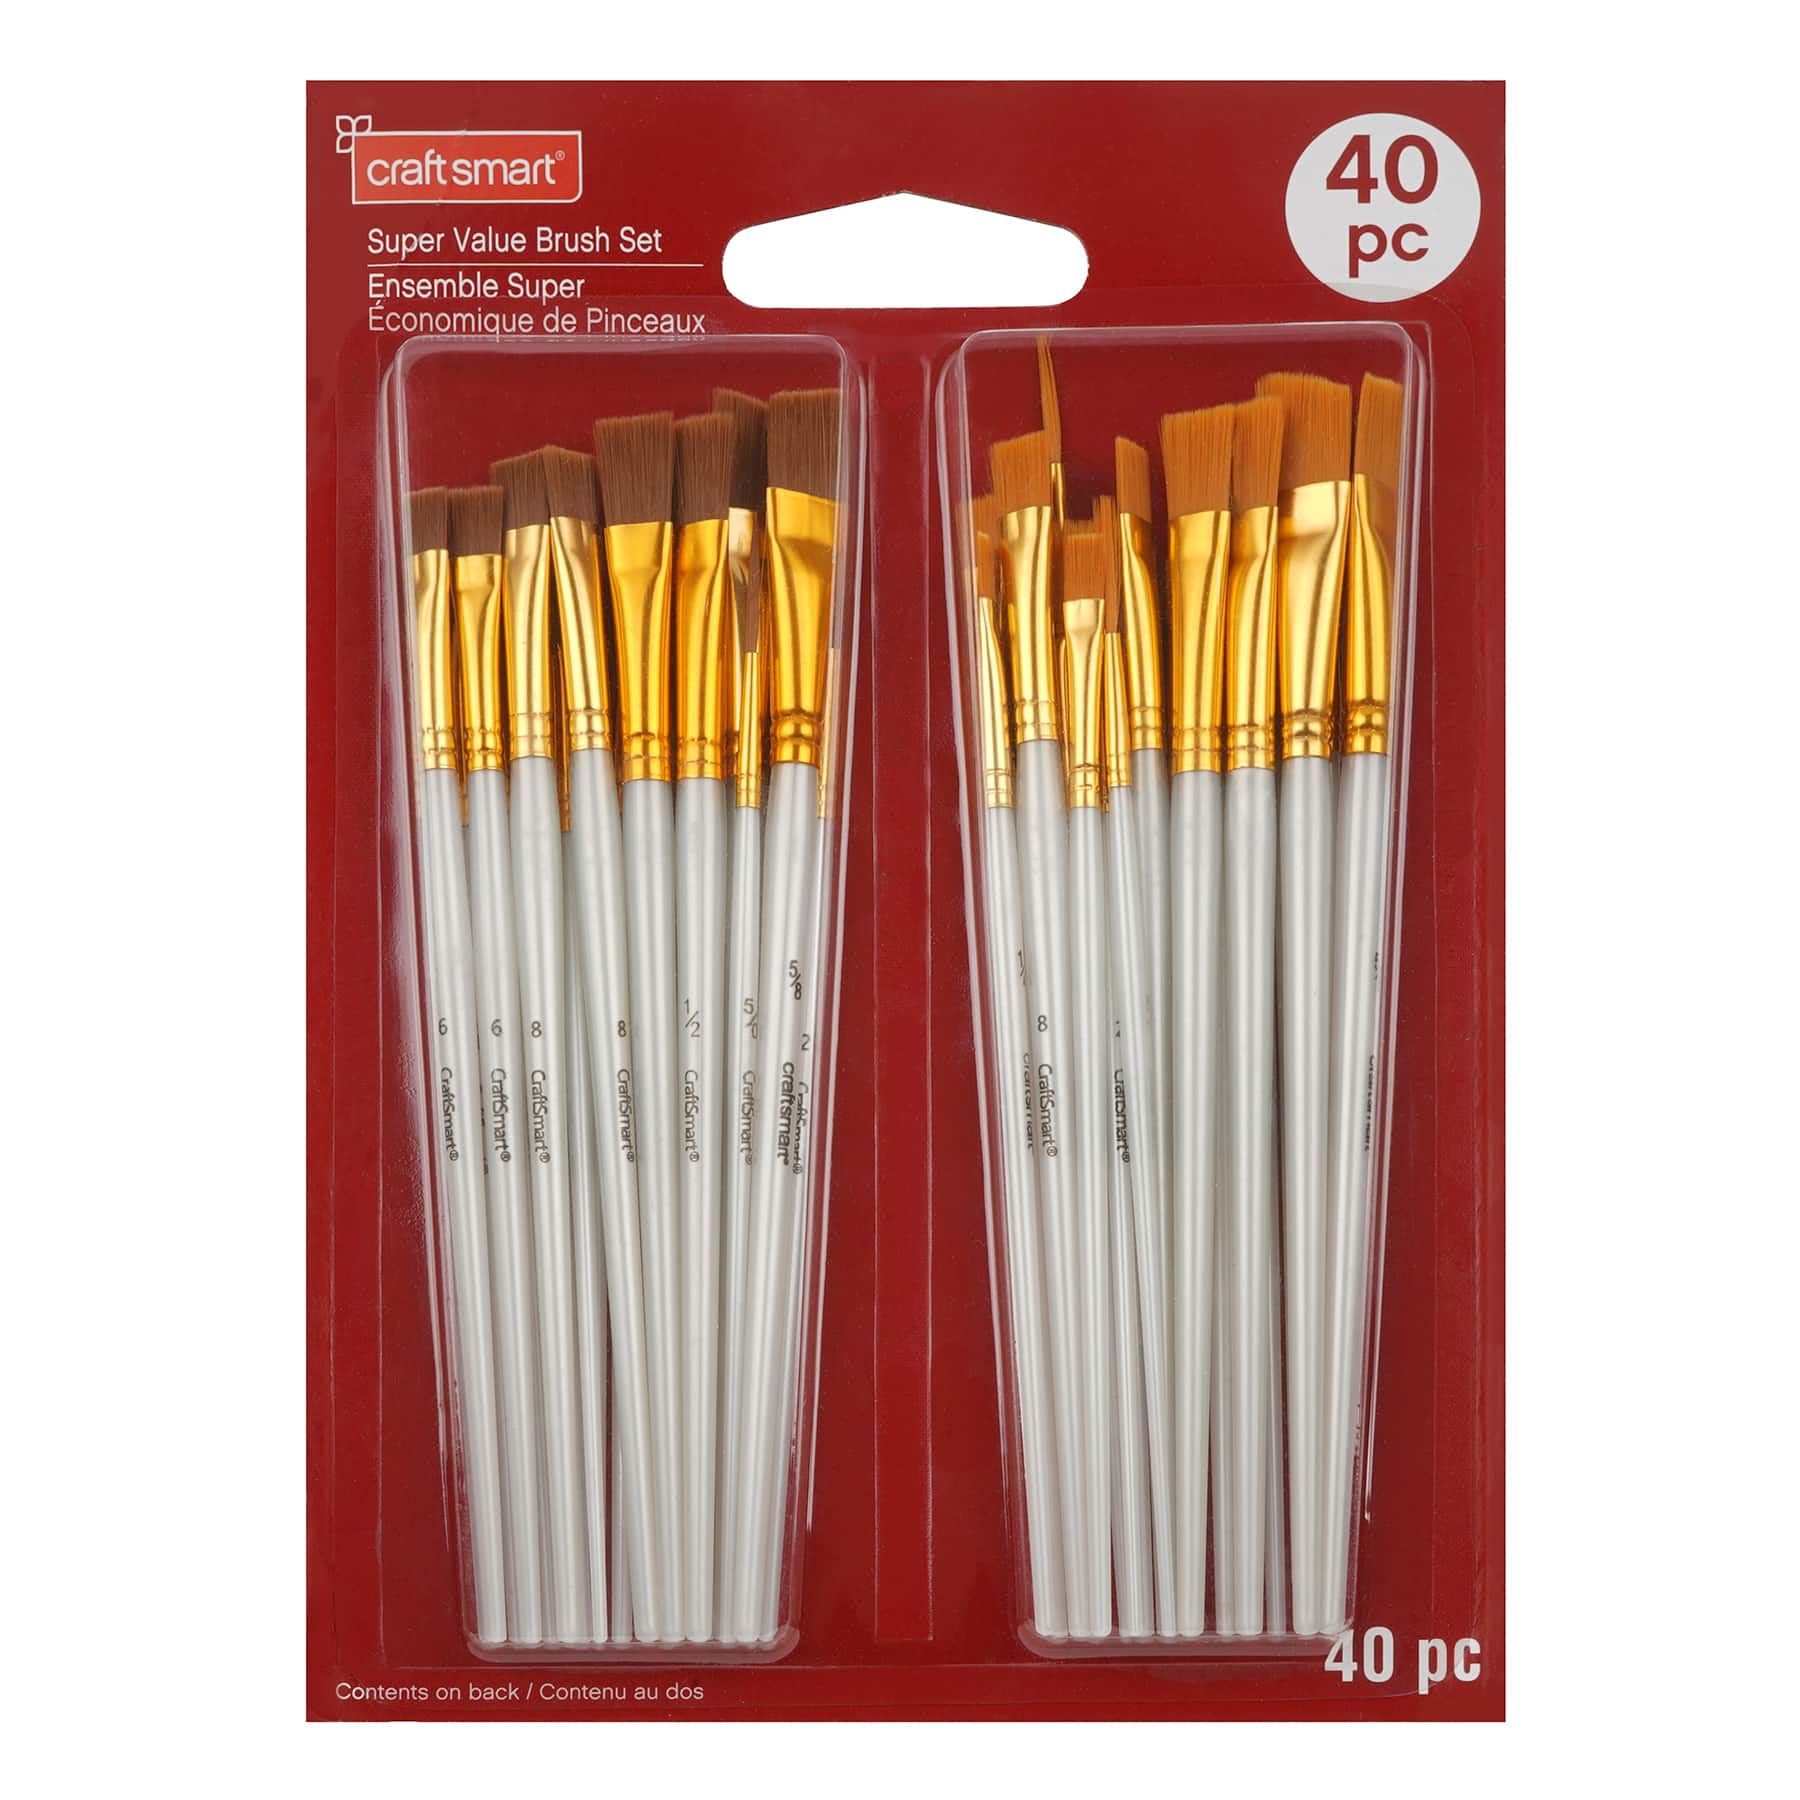 6 Packs: 40 ct. (240 total) Super Value Brush Set by Craft Smart&#xAE;